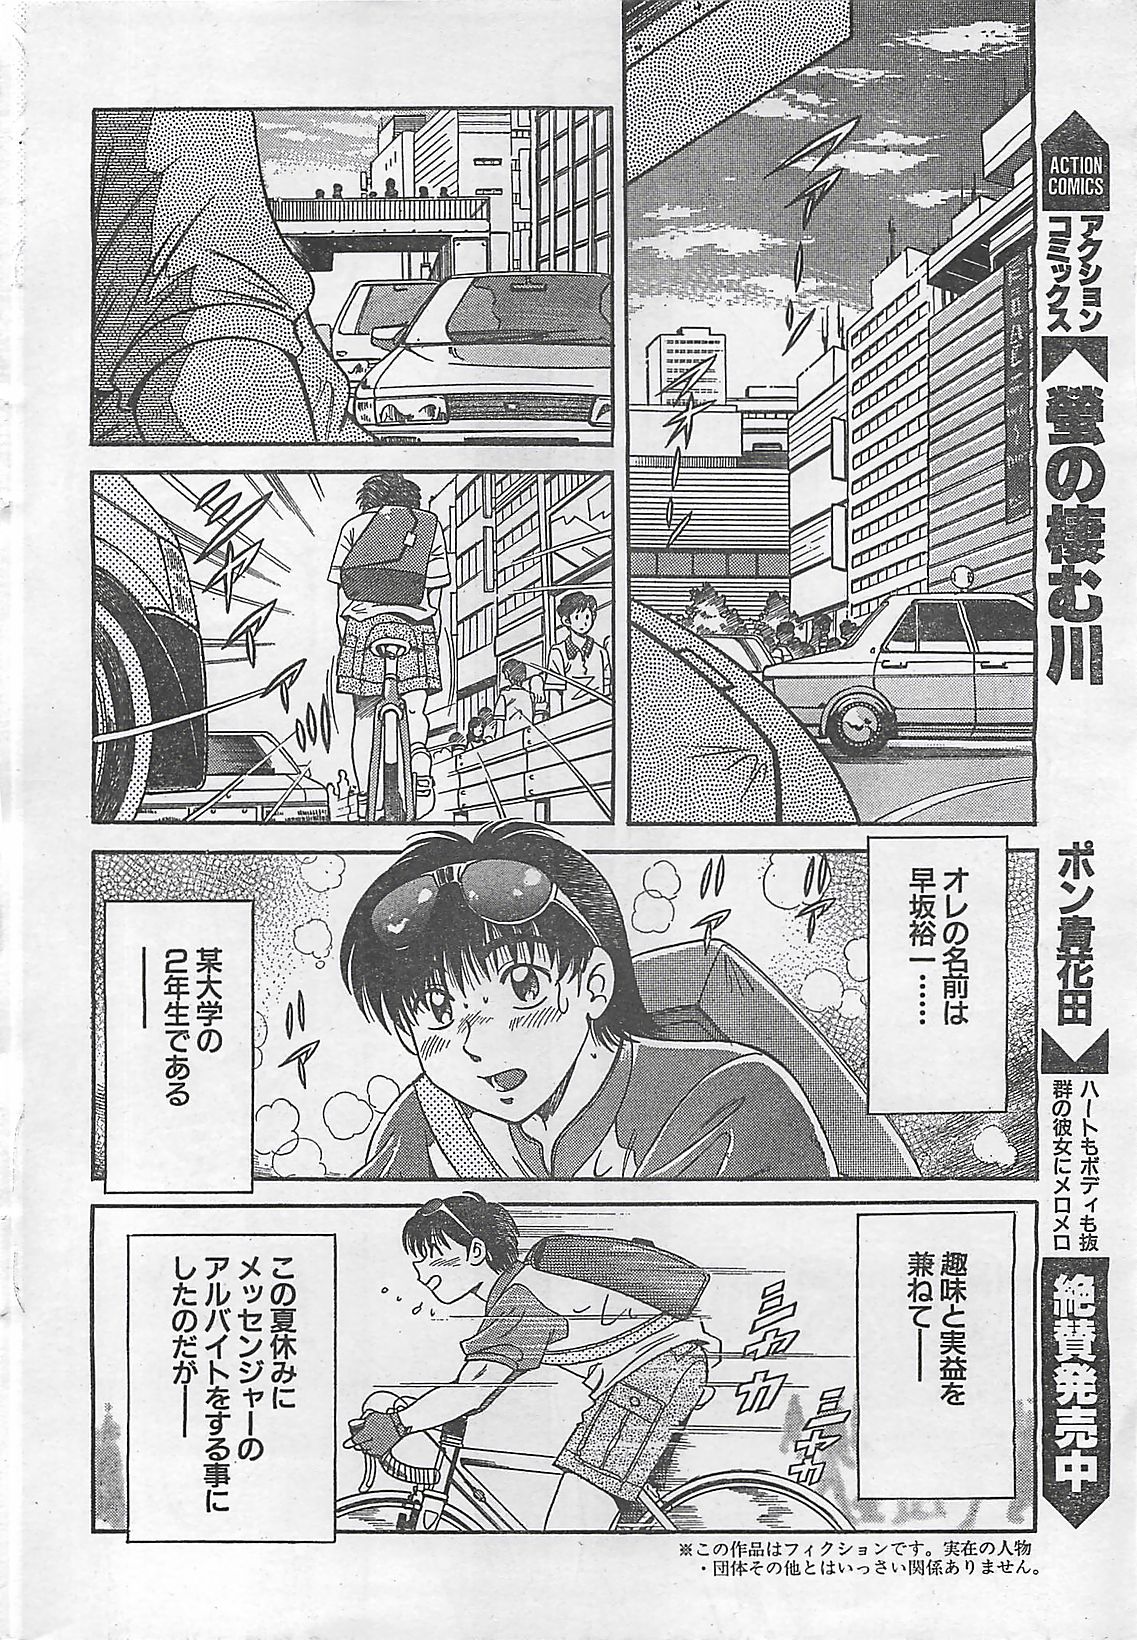 Action Pizazz 2003-09 page 24 full